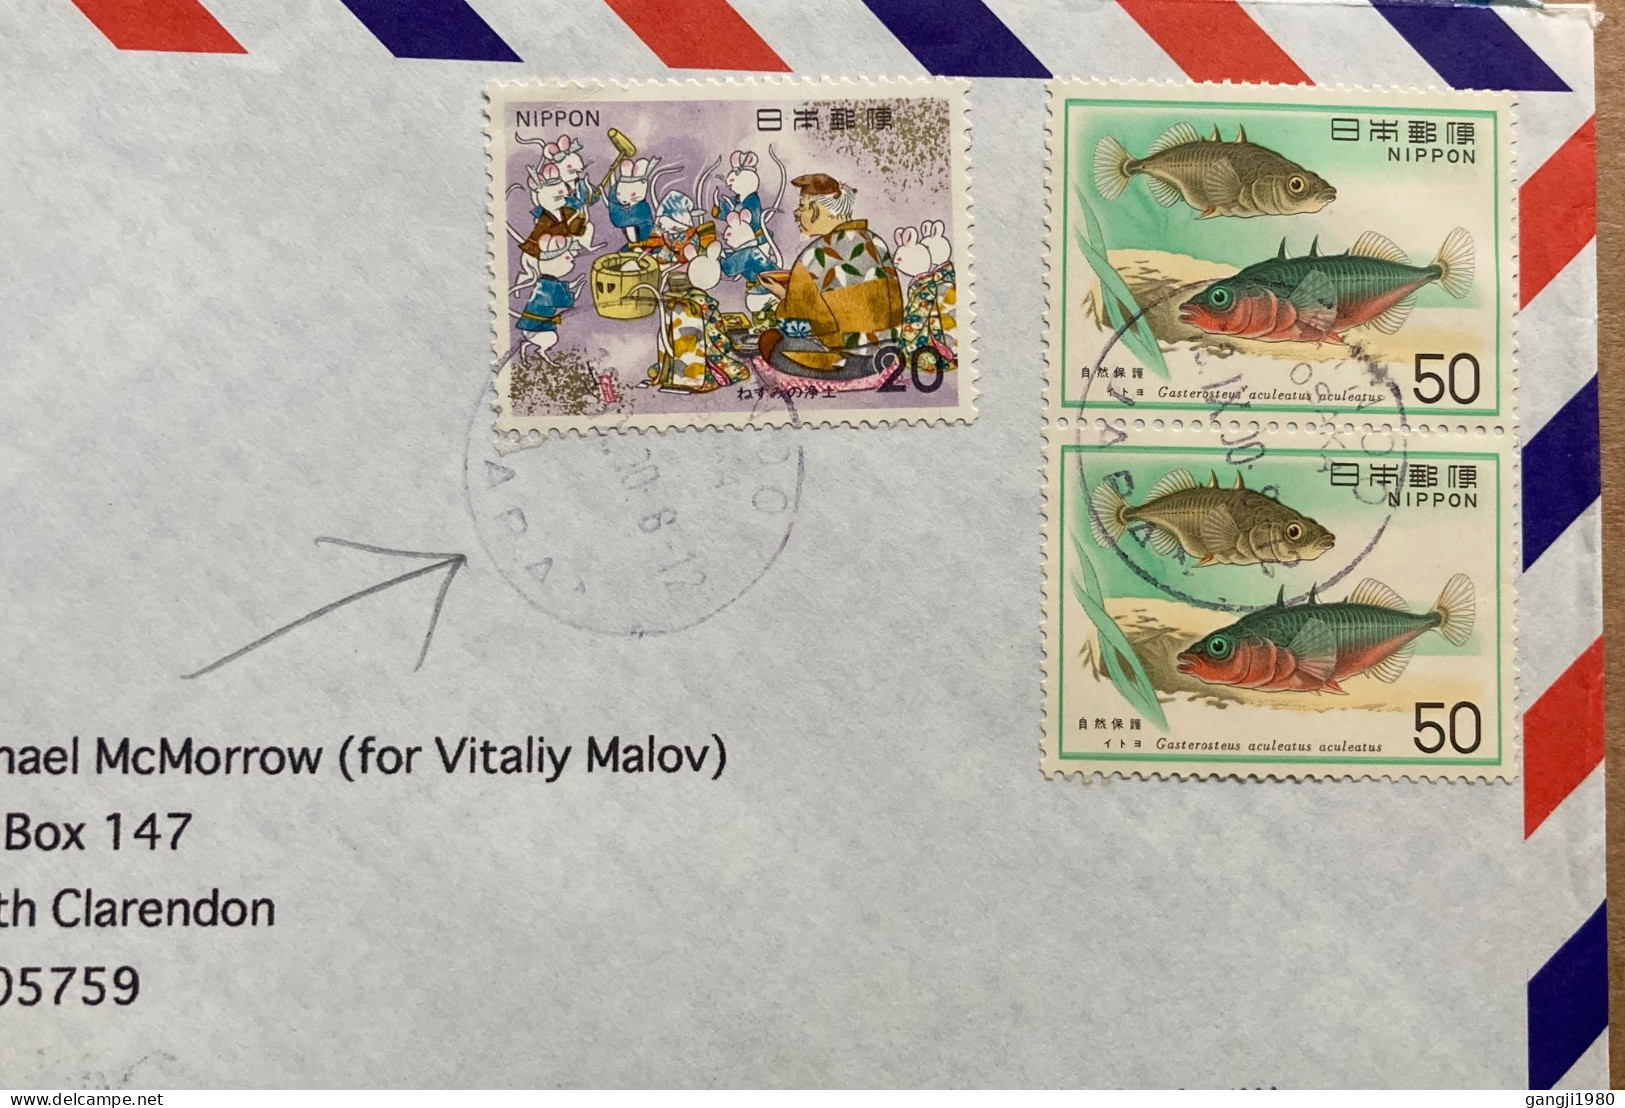 JAPAN 1980, COVER USED TO USA, DISNEY, MICKY MOUSE, FAIRY TALE, CHILDREN STORIES, FISH, 3 STAMP, MINO CITY CANCEL. - Brieven En Documenten